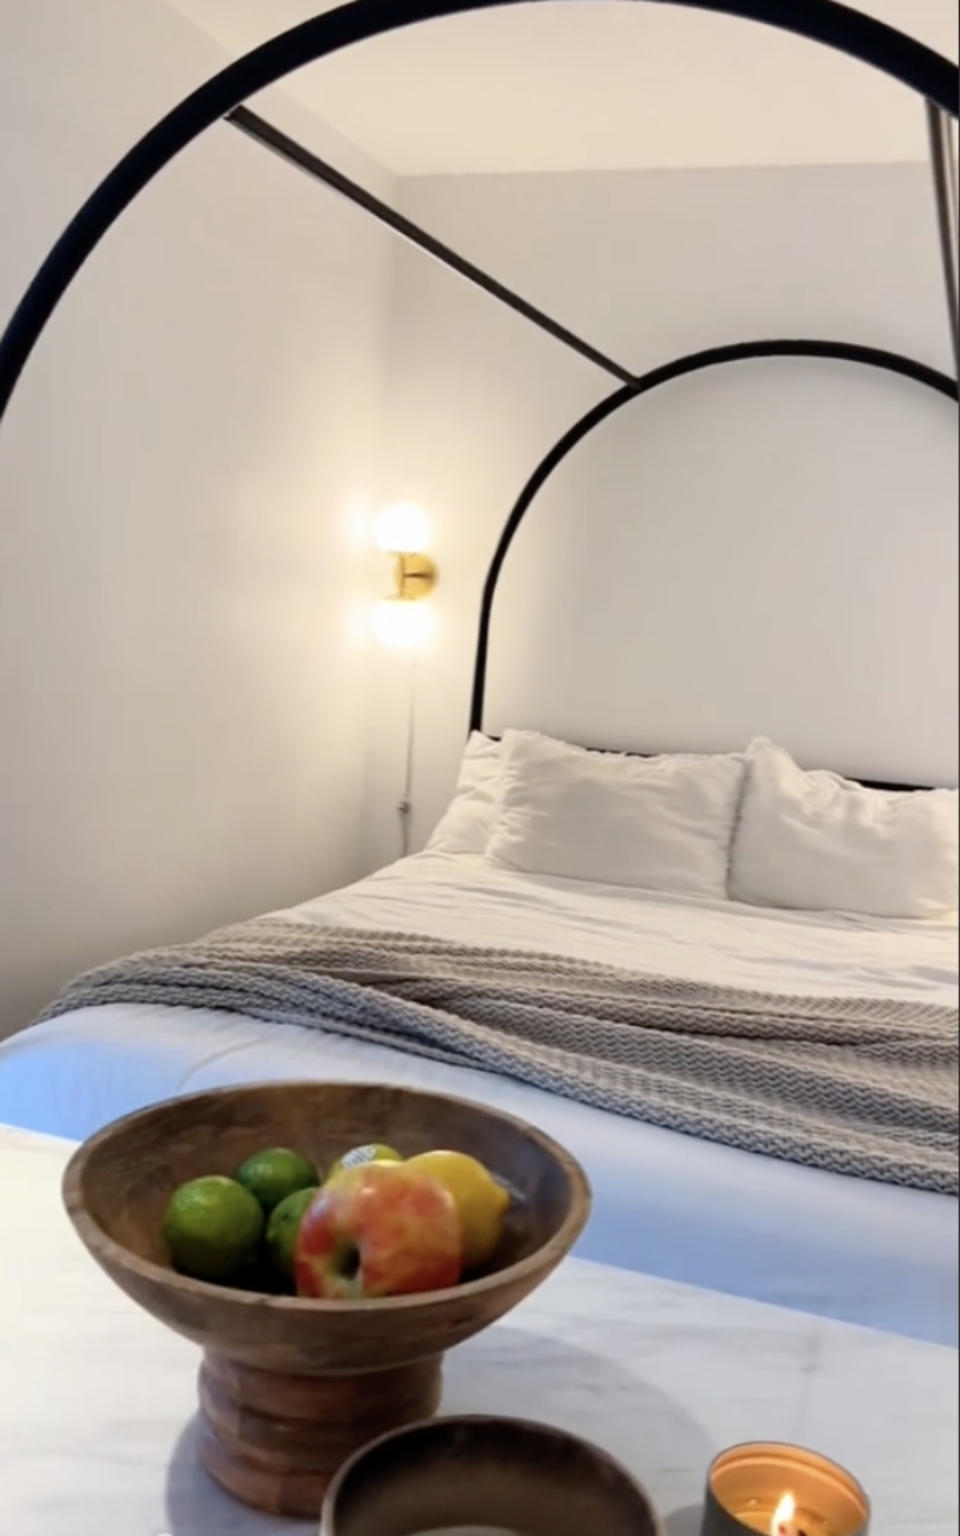 A minimalist bedroom with a circular frame headboard, striped blanket, bowl of fruit on the side table, and a lit candle